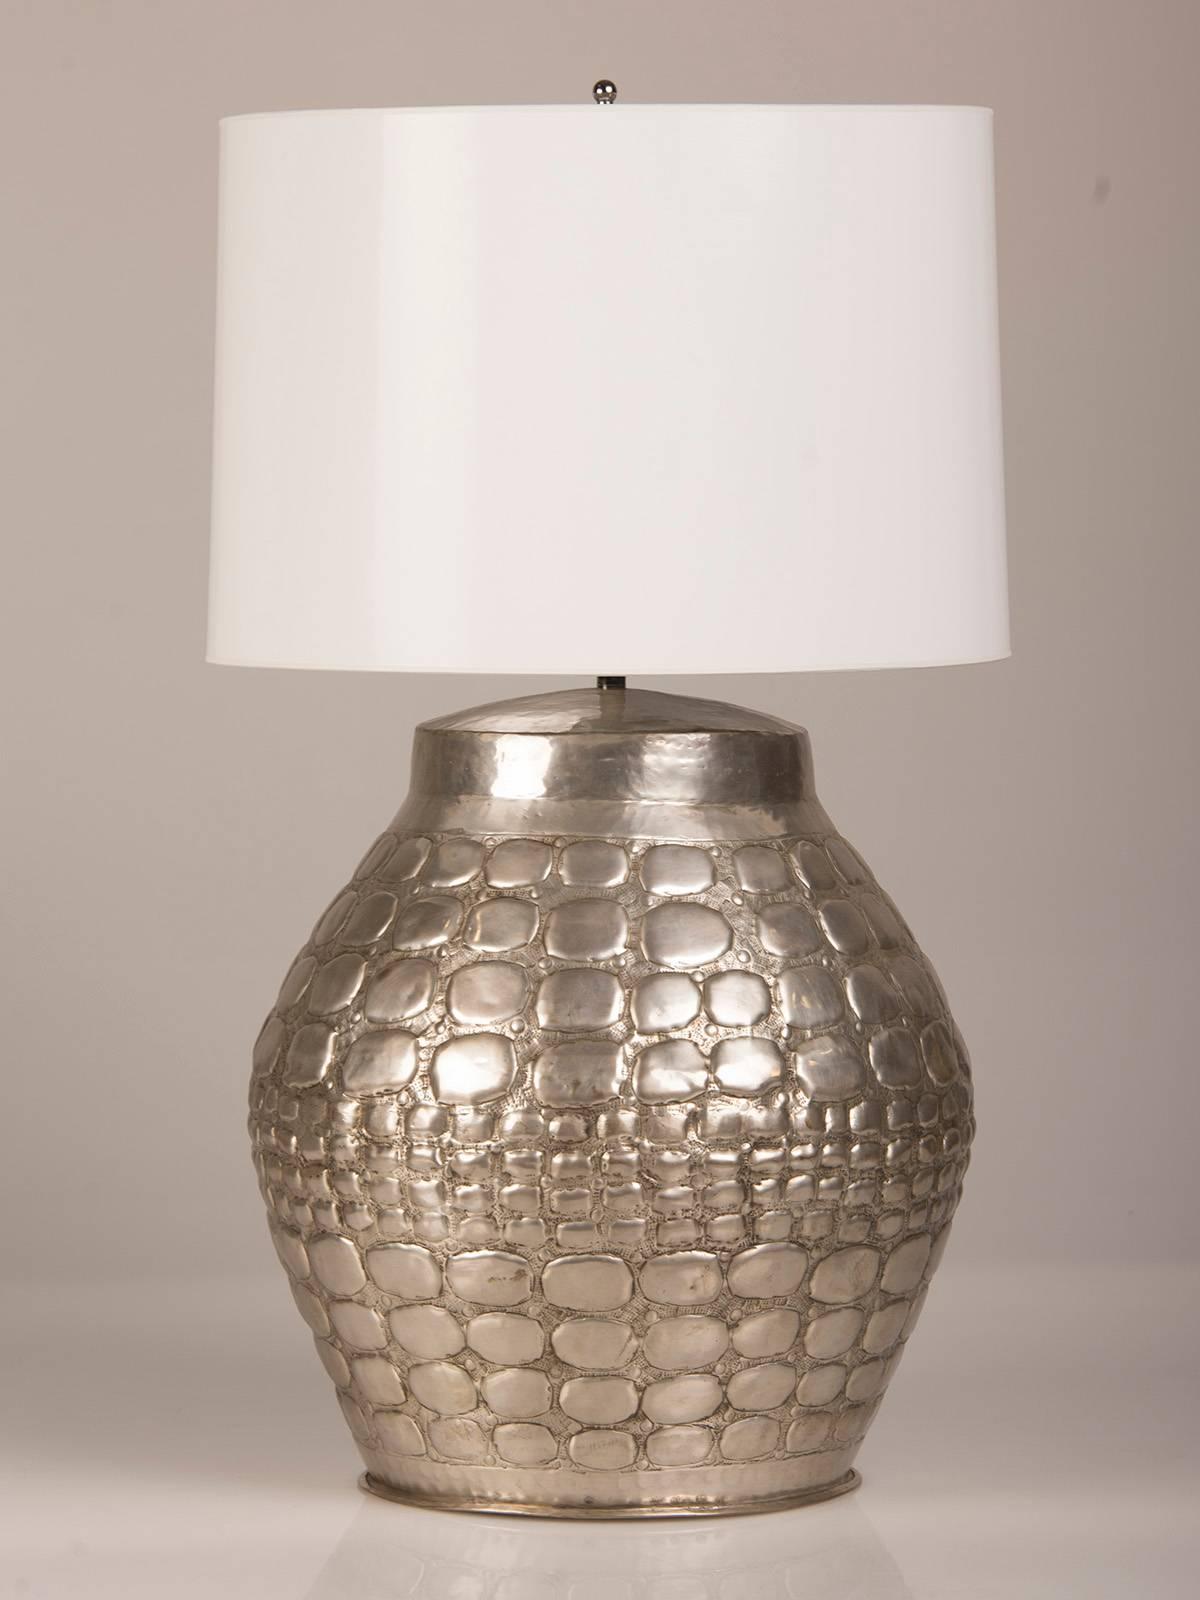 Receive our new selections direct from 1stdibs by email each week. Please click on “Follow Dealer” button below and see them first!

Crocodile pattern metal table lamp found in France. The enormous scale of this lamp with its metal surface